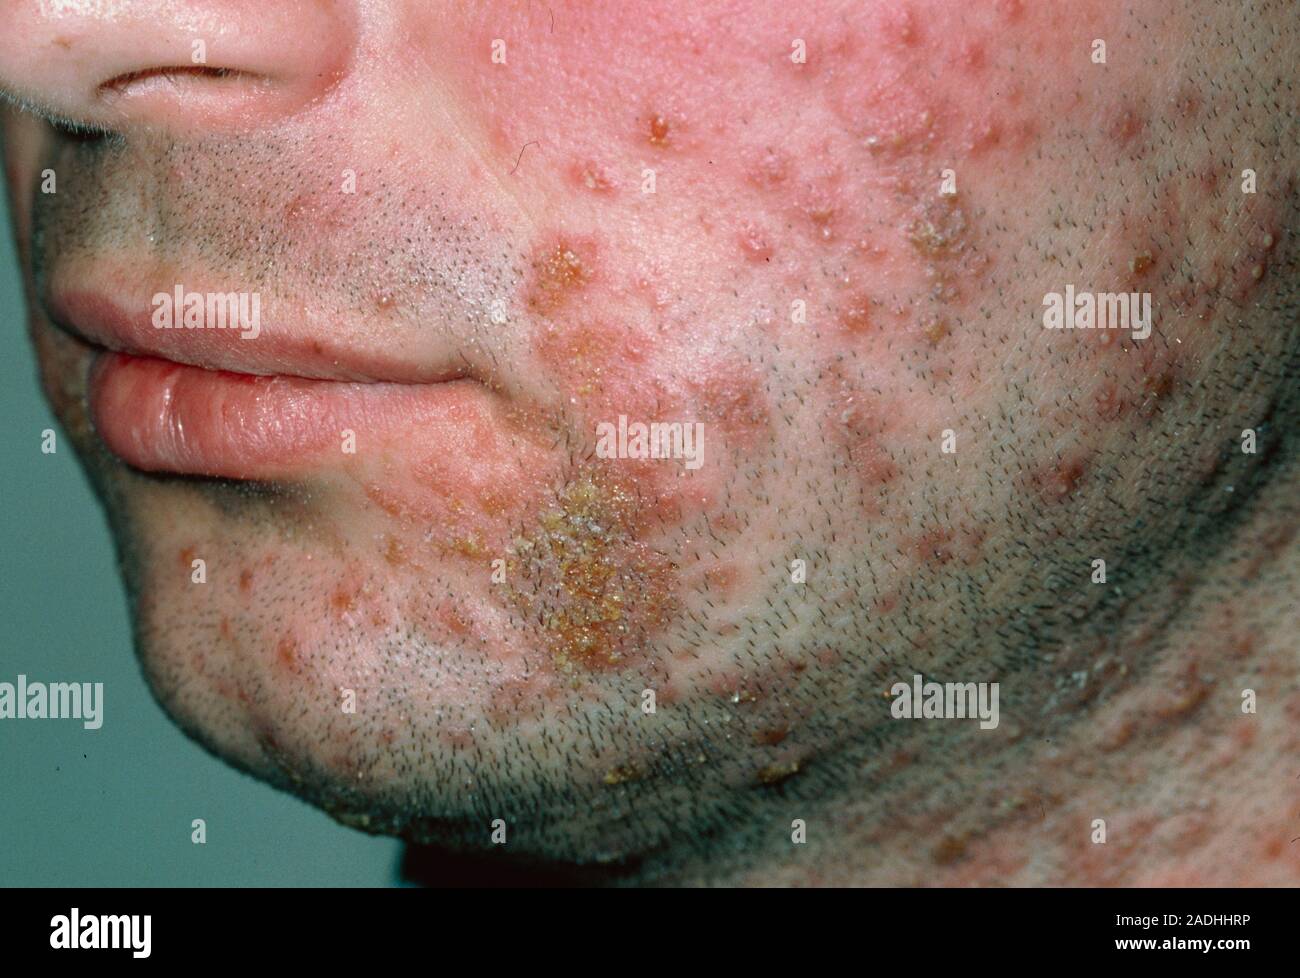 Impetigo Close Up Of Crusty Yellow Sores On The Face Of A Man Caused